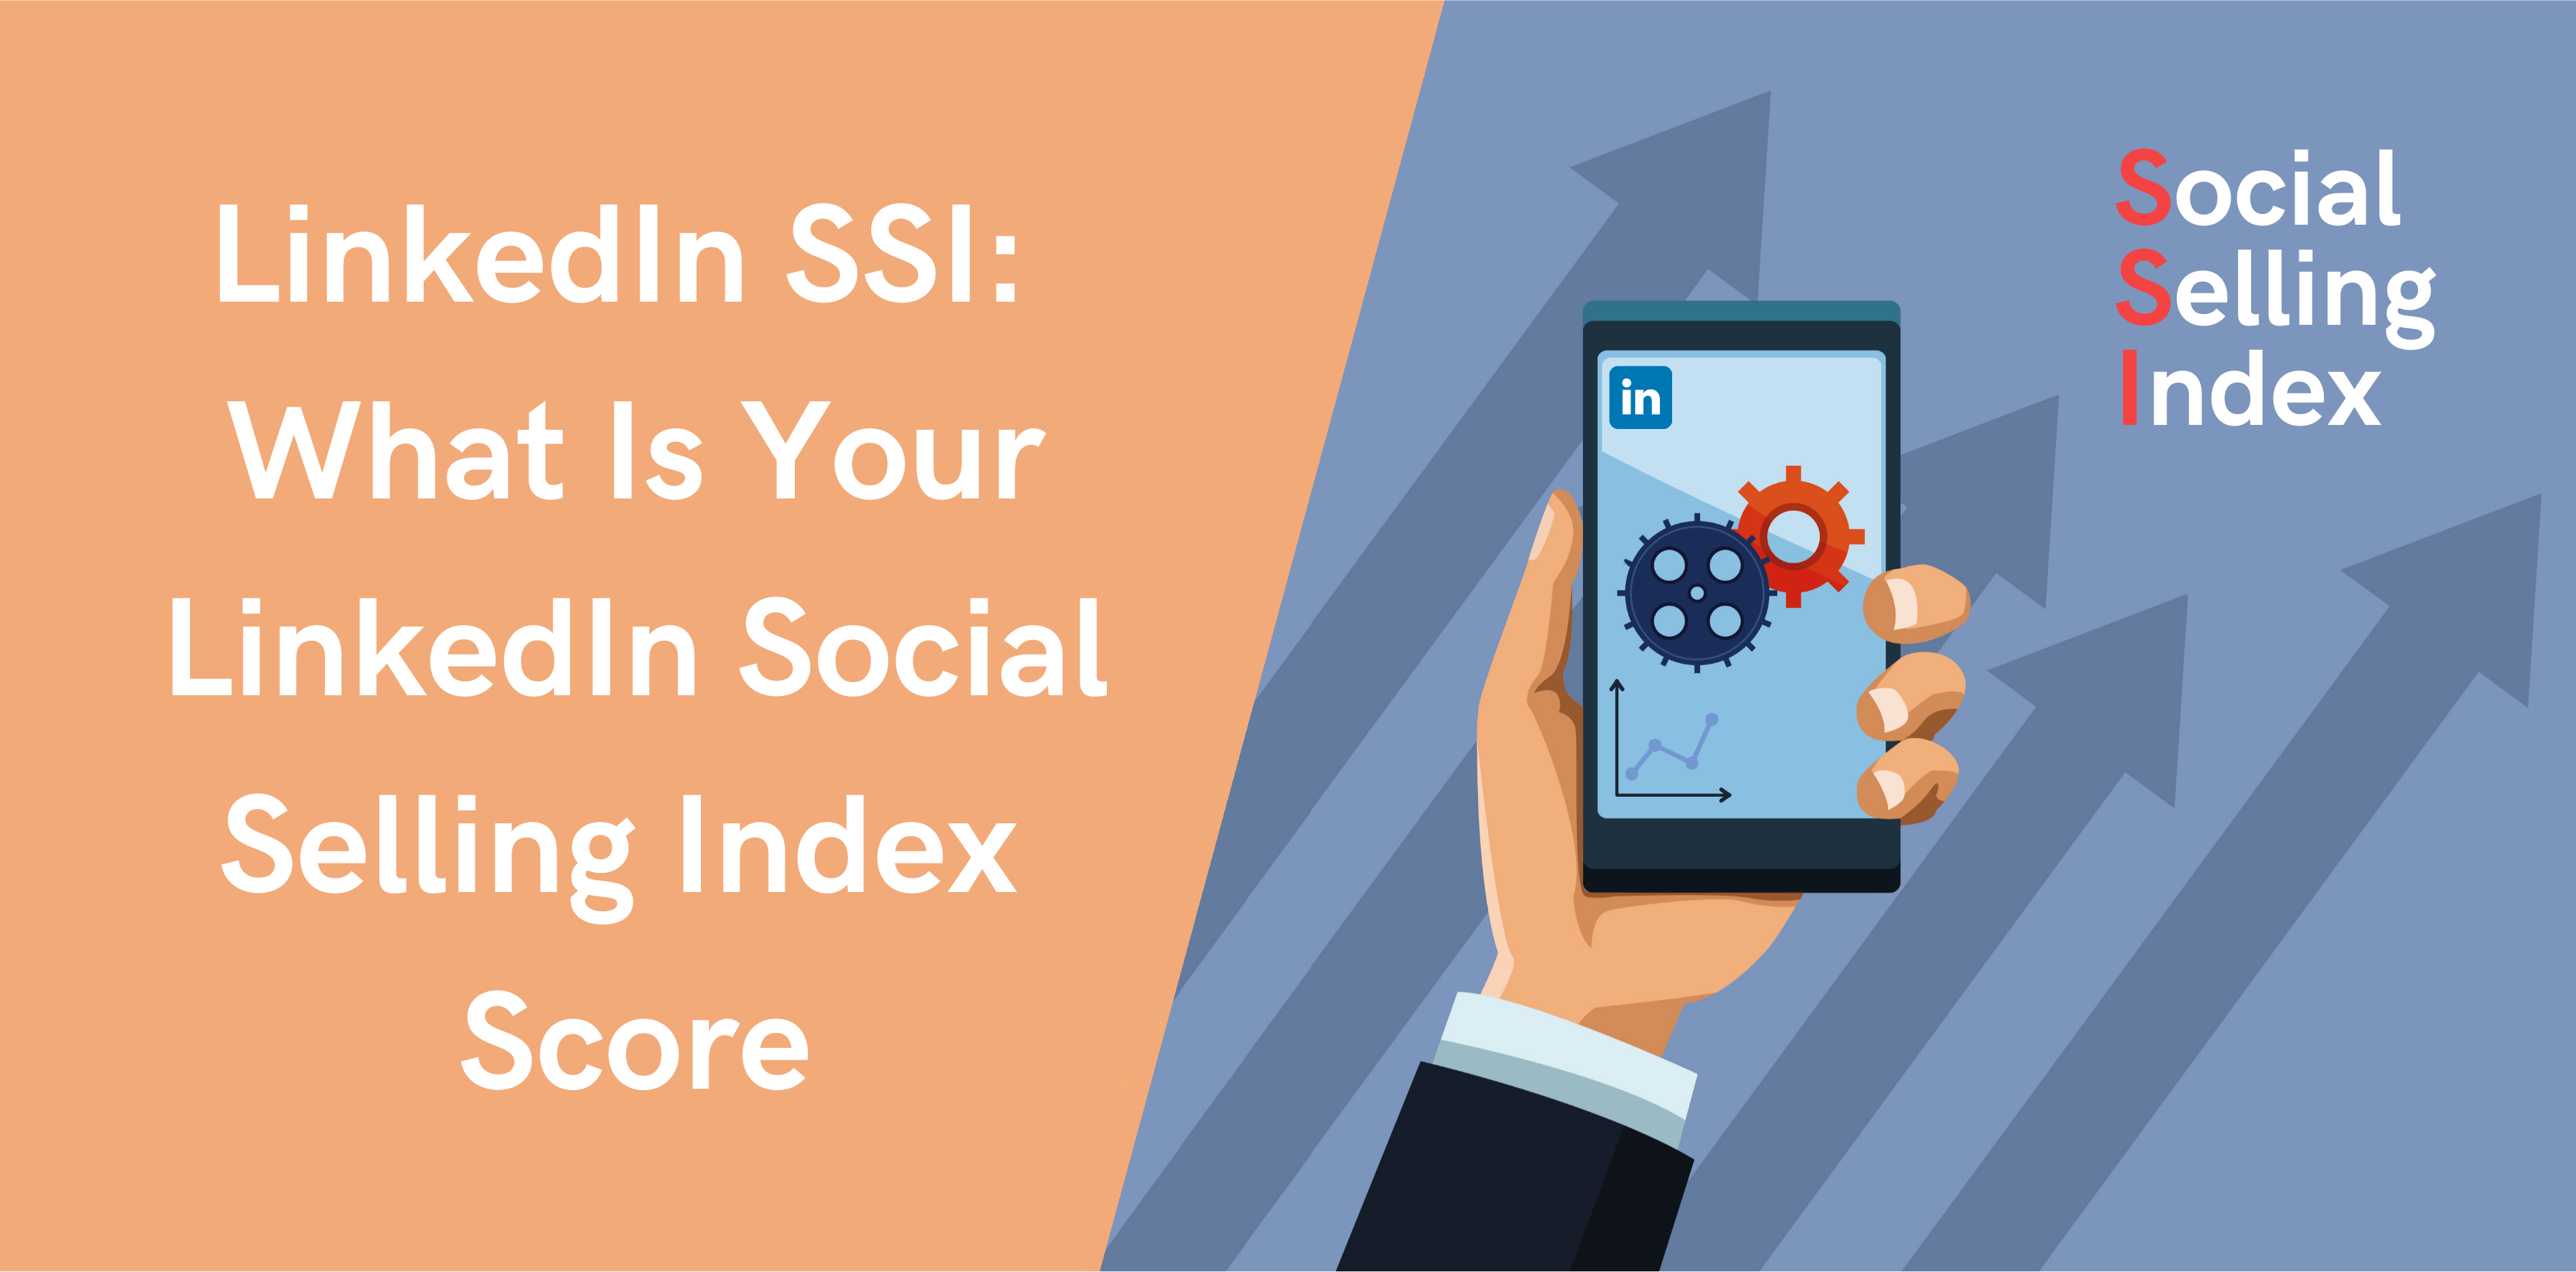 Thumbnail-LinkedIn-SSI-What-is-Your-LinkedIn-Social-Selling-Index-Score